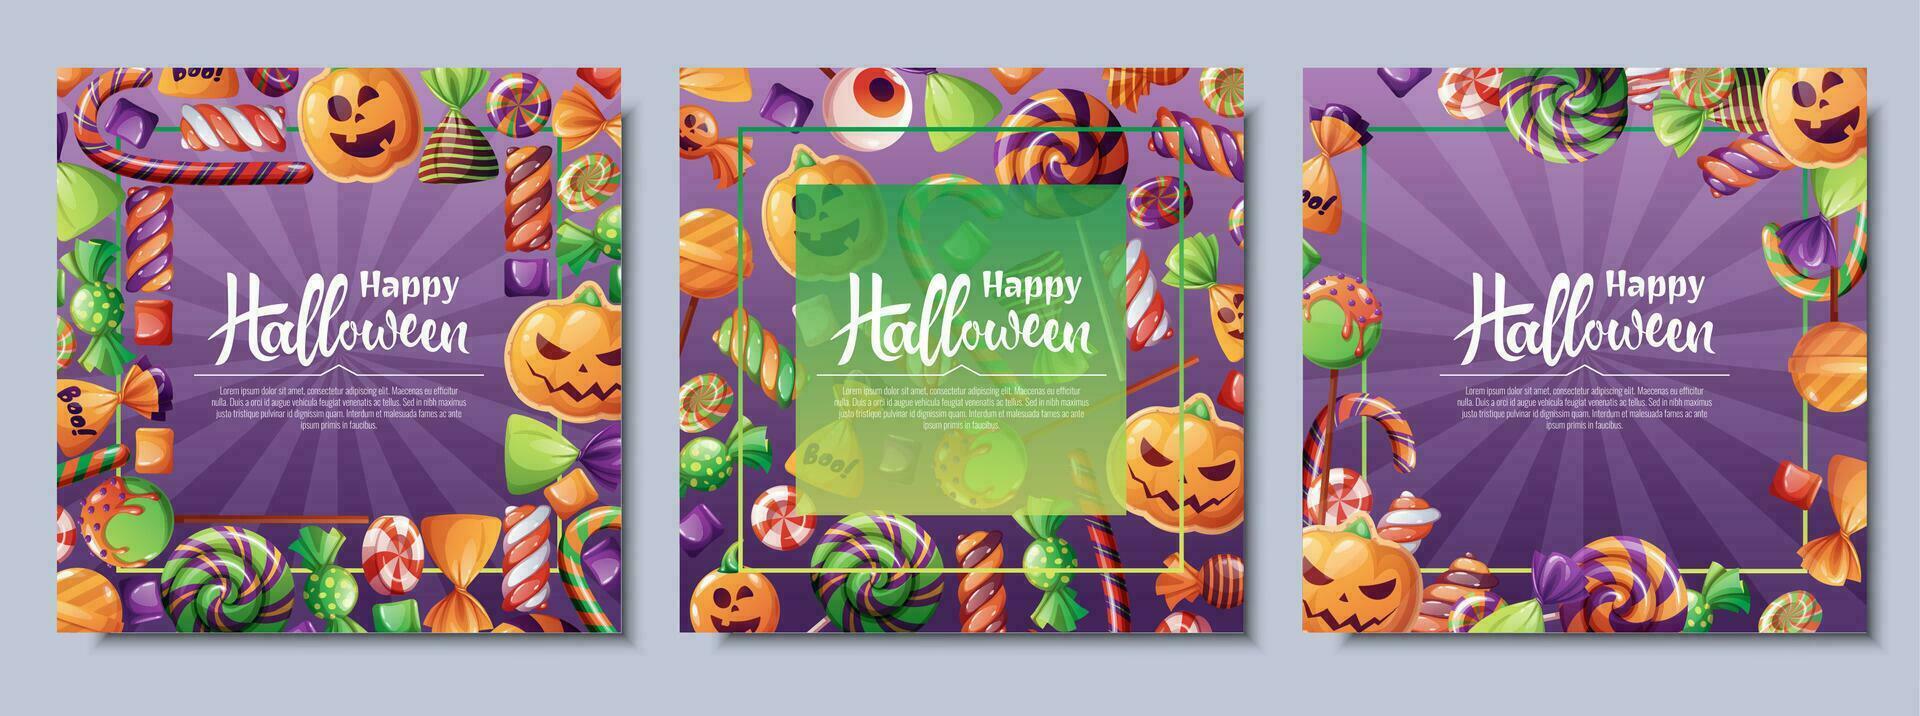 Set of vector backgrounds for Halloween invitation or greeting card. Poster, banner with with pumpkin biscuits, spooky candies, sweets, cookies, lollipops. Great for flyer, backdrop